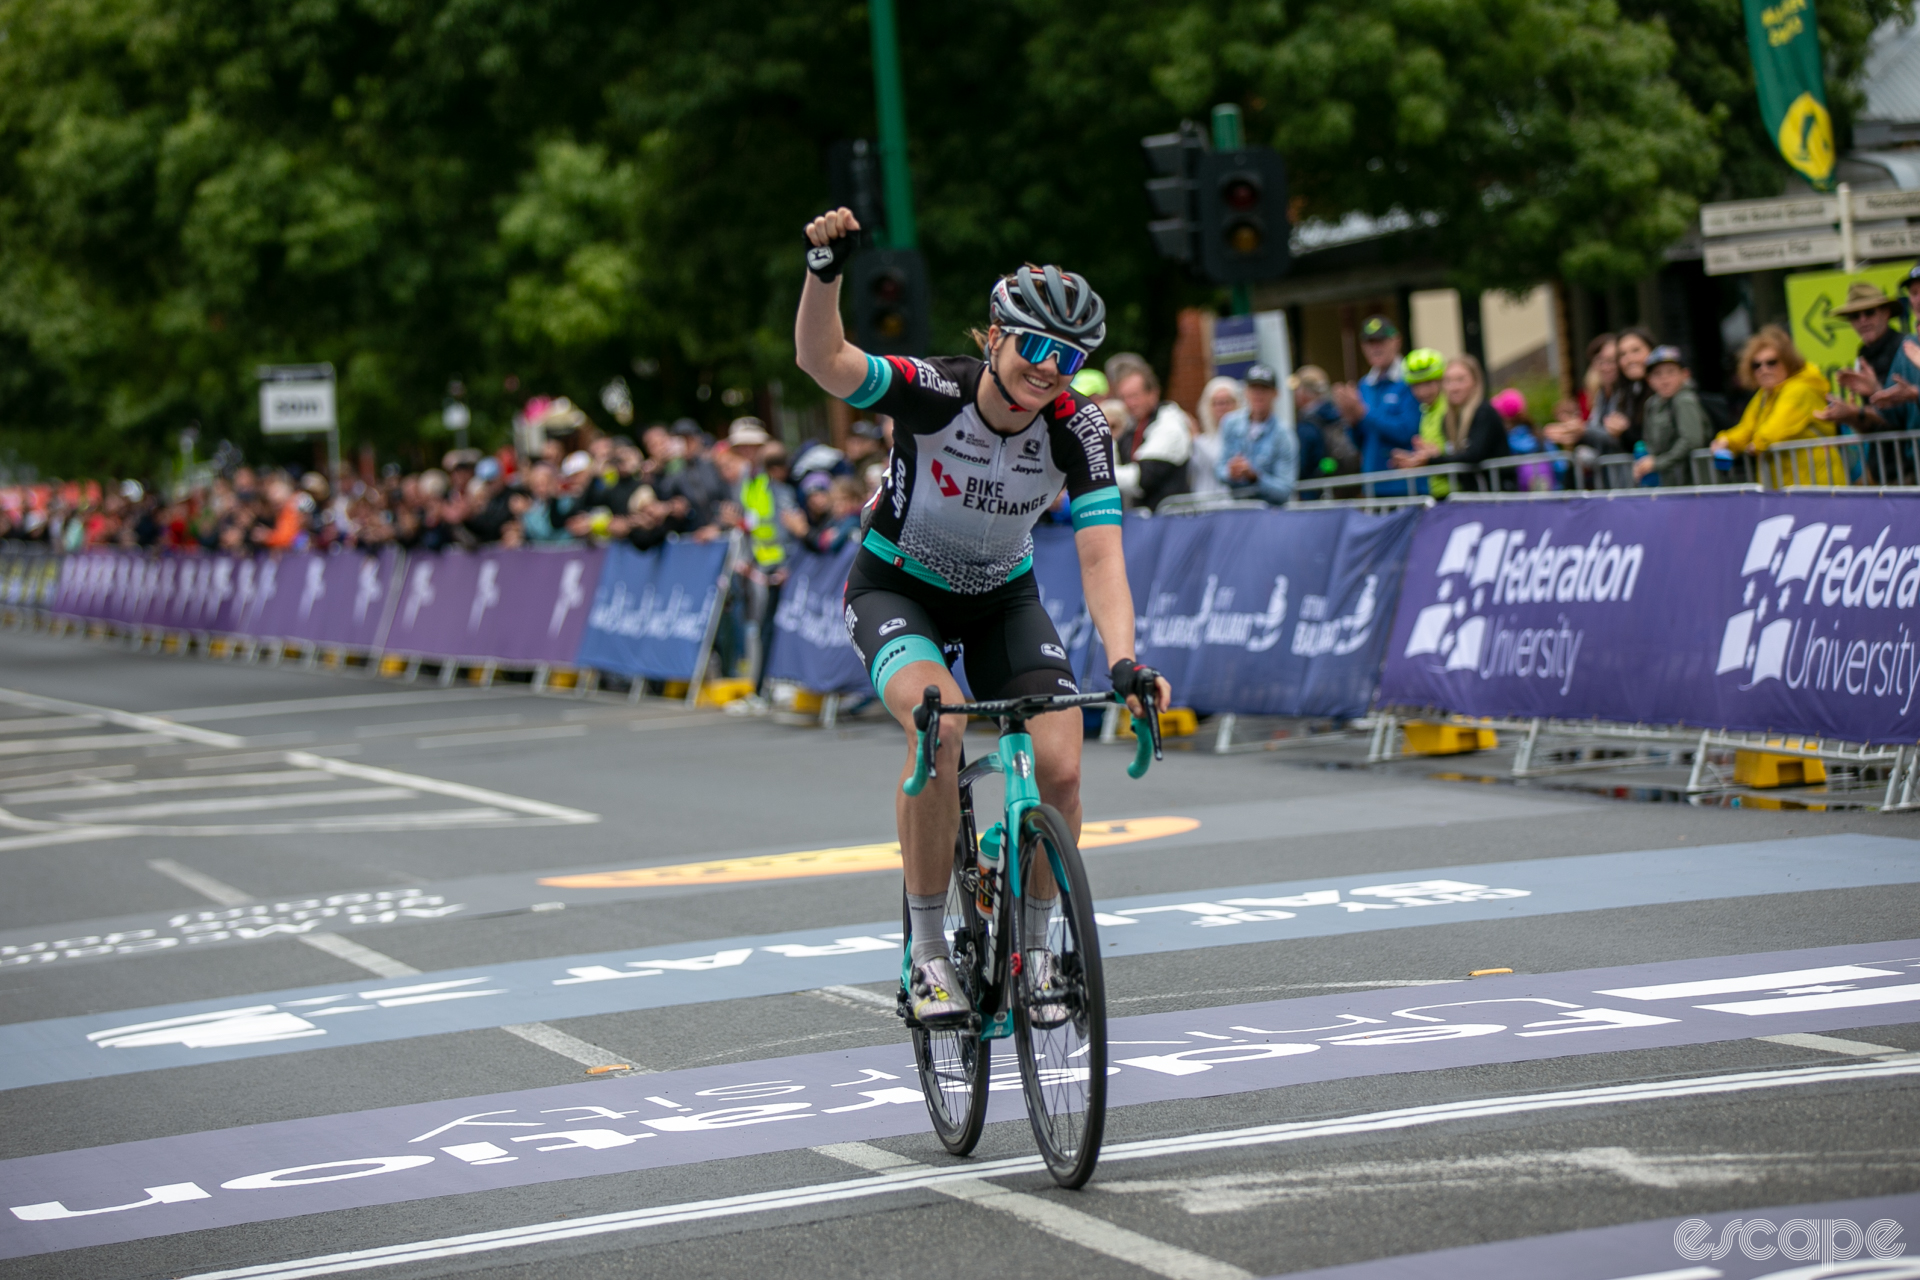 Sarah Roy celebrates victory in the Australian Road Nationals road race by punching the air with her right hand as she crosses the finish line.